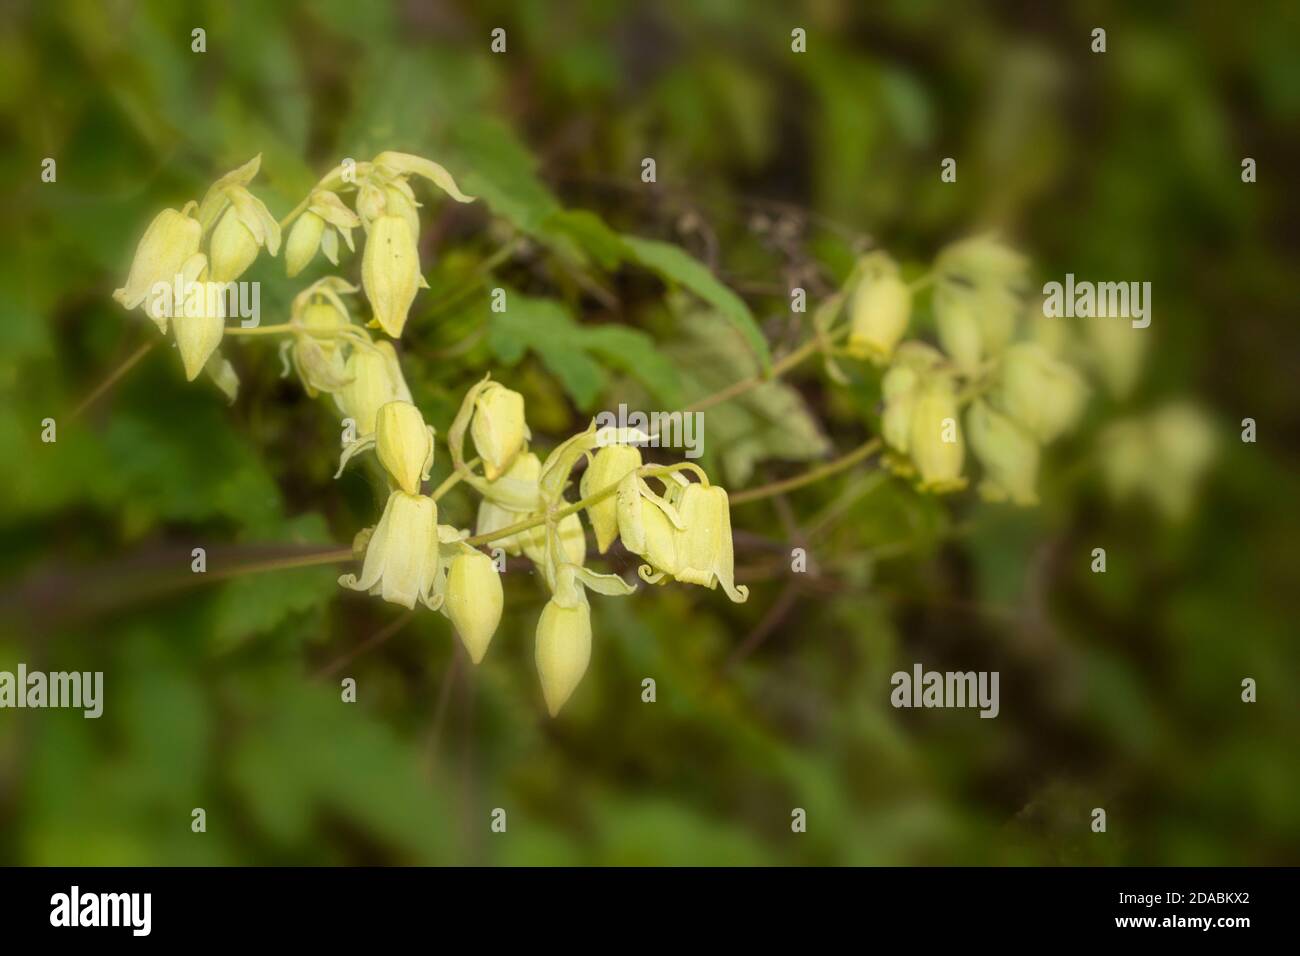 Clematis rehderiana, close up unusual natural portrait of flowering plant Stock Photo